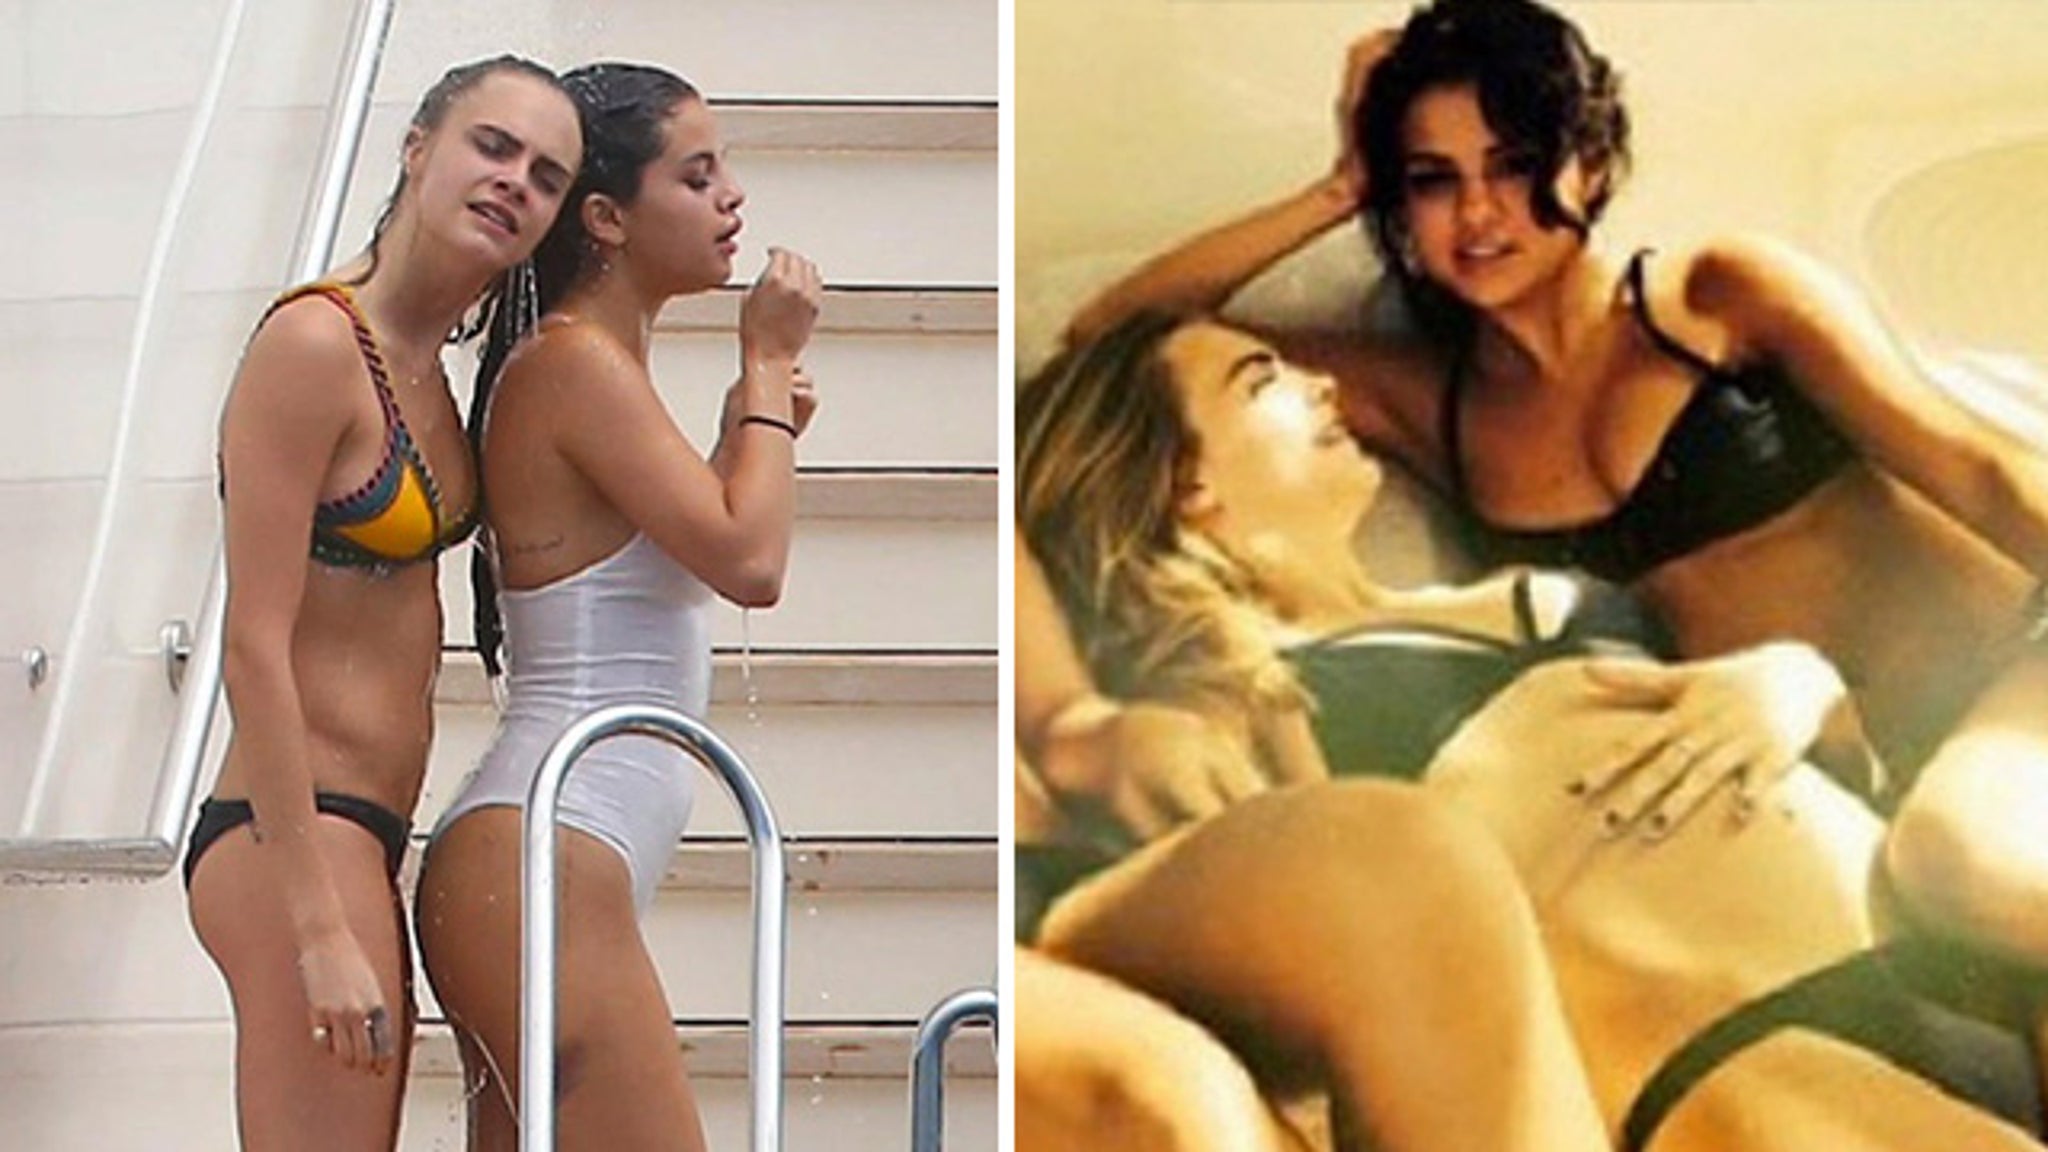 Selena Gomez And Cara Delevingne We See The Signs … But What Do They Mean